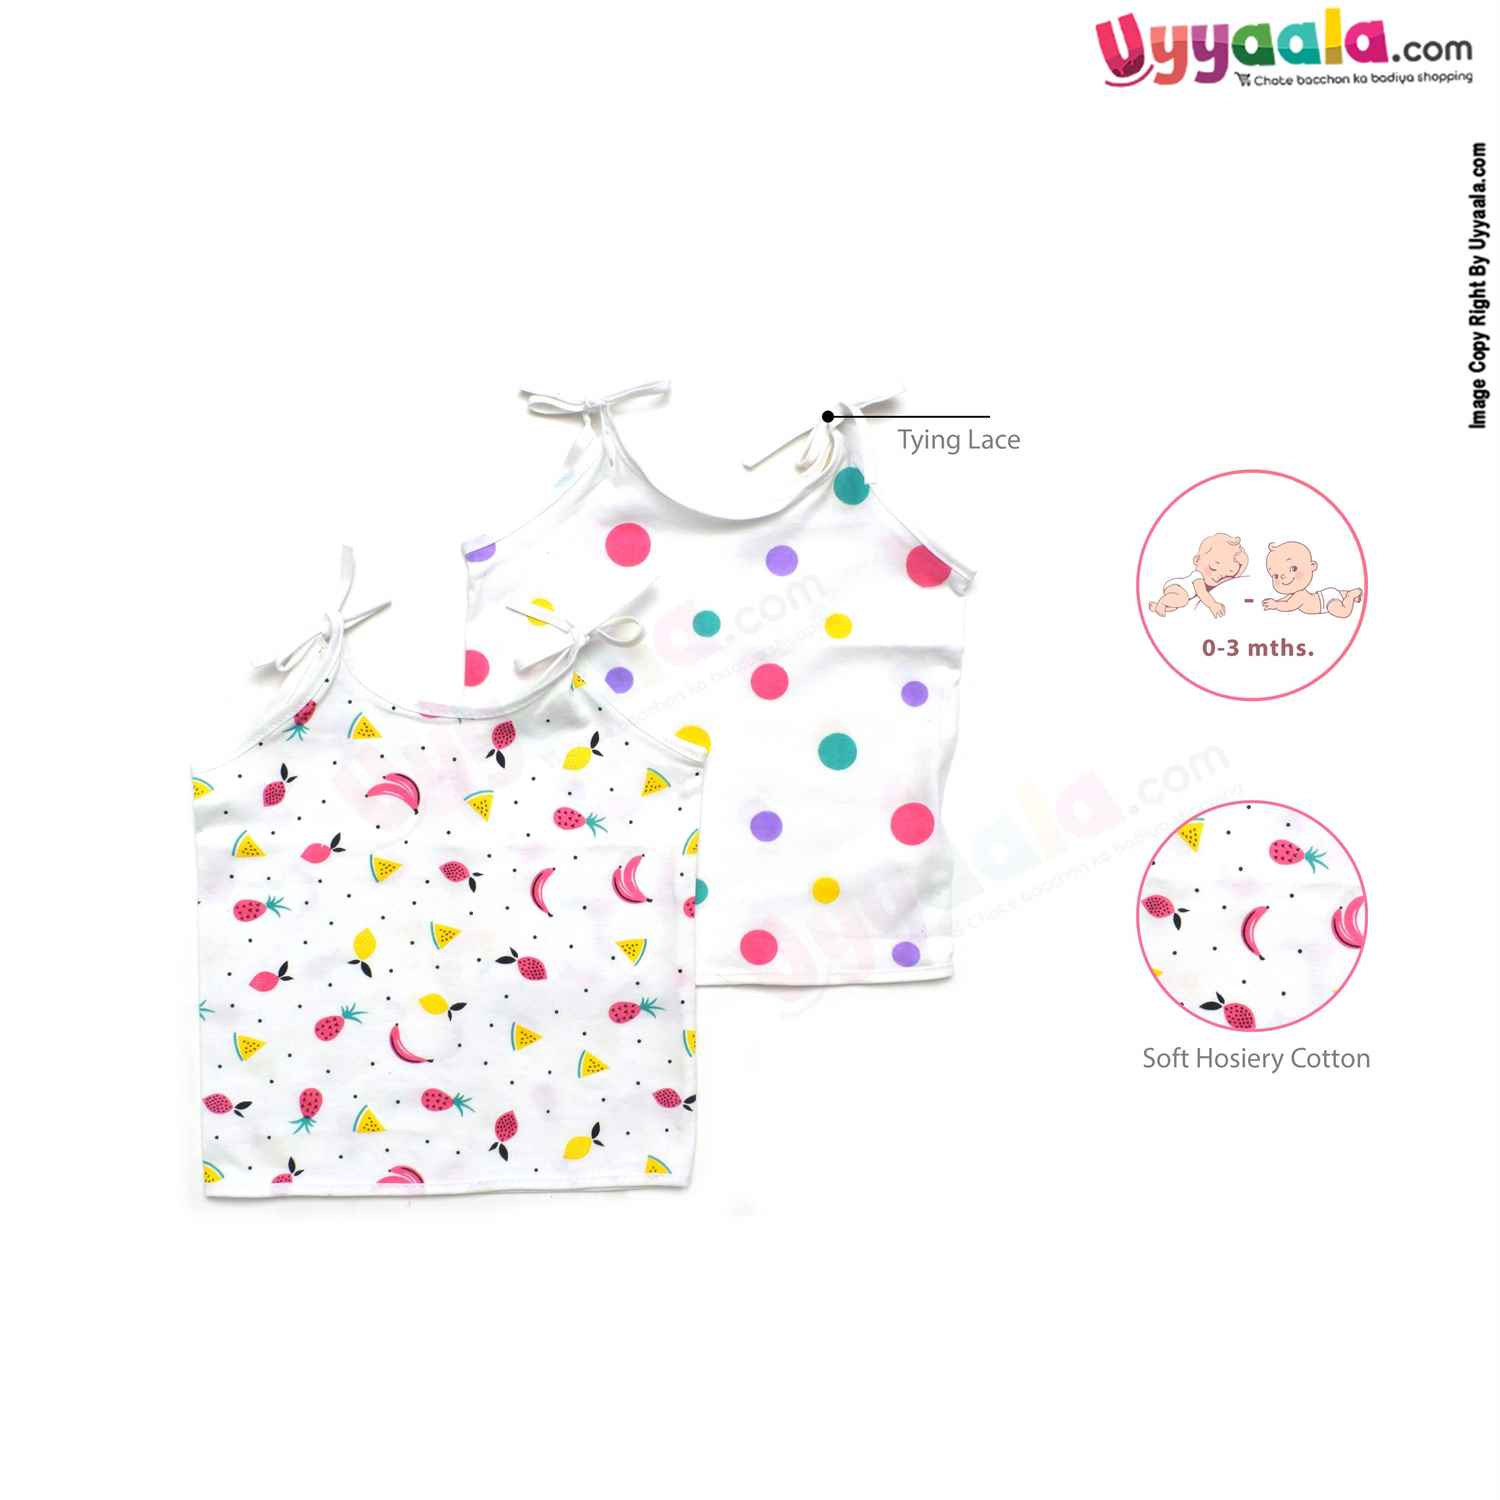 SNUG UP Sleeveless Baby Jabla Set, Top Opening Tie knot Lace Model, Premium Quality Cotton Baby Wear, Fruits & Dots Print, (0-3M), 2Pack - White